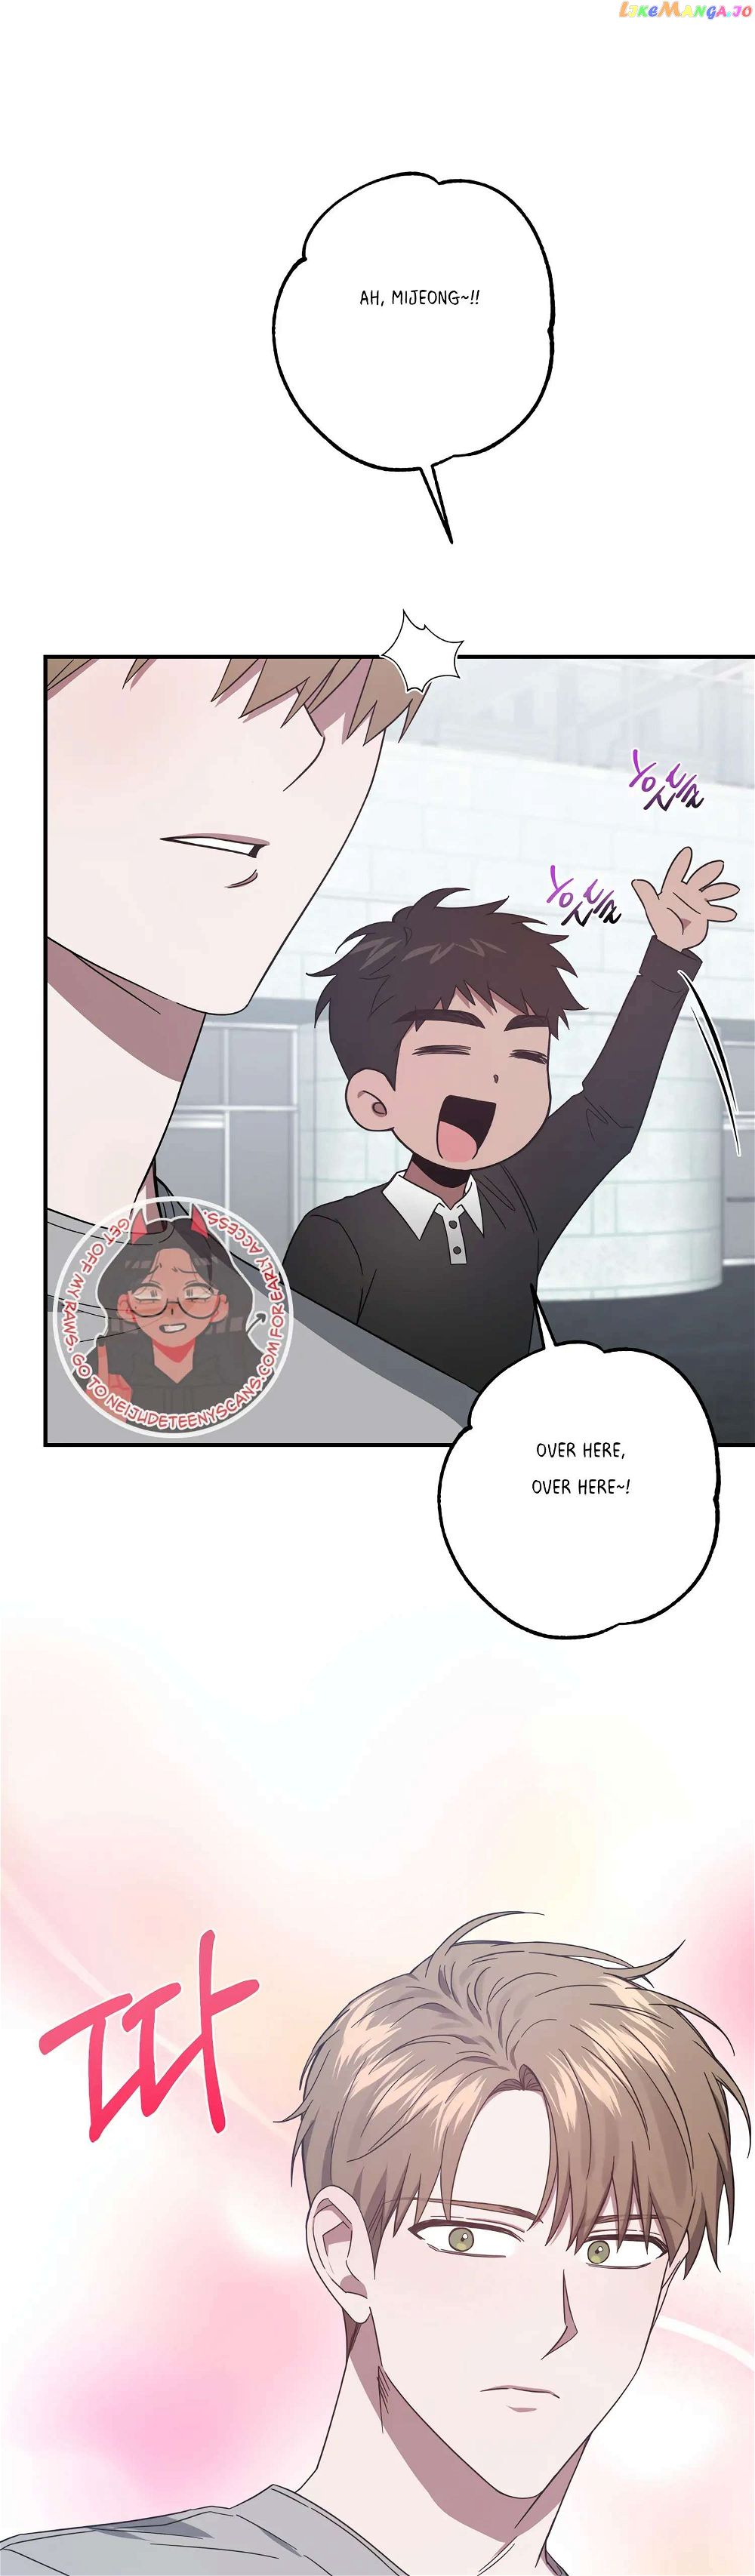 Mijeong’s Relationships chapter 38 - Page 5